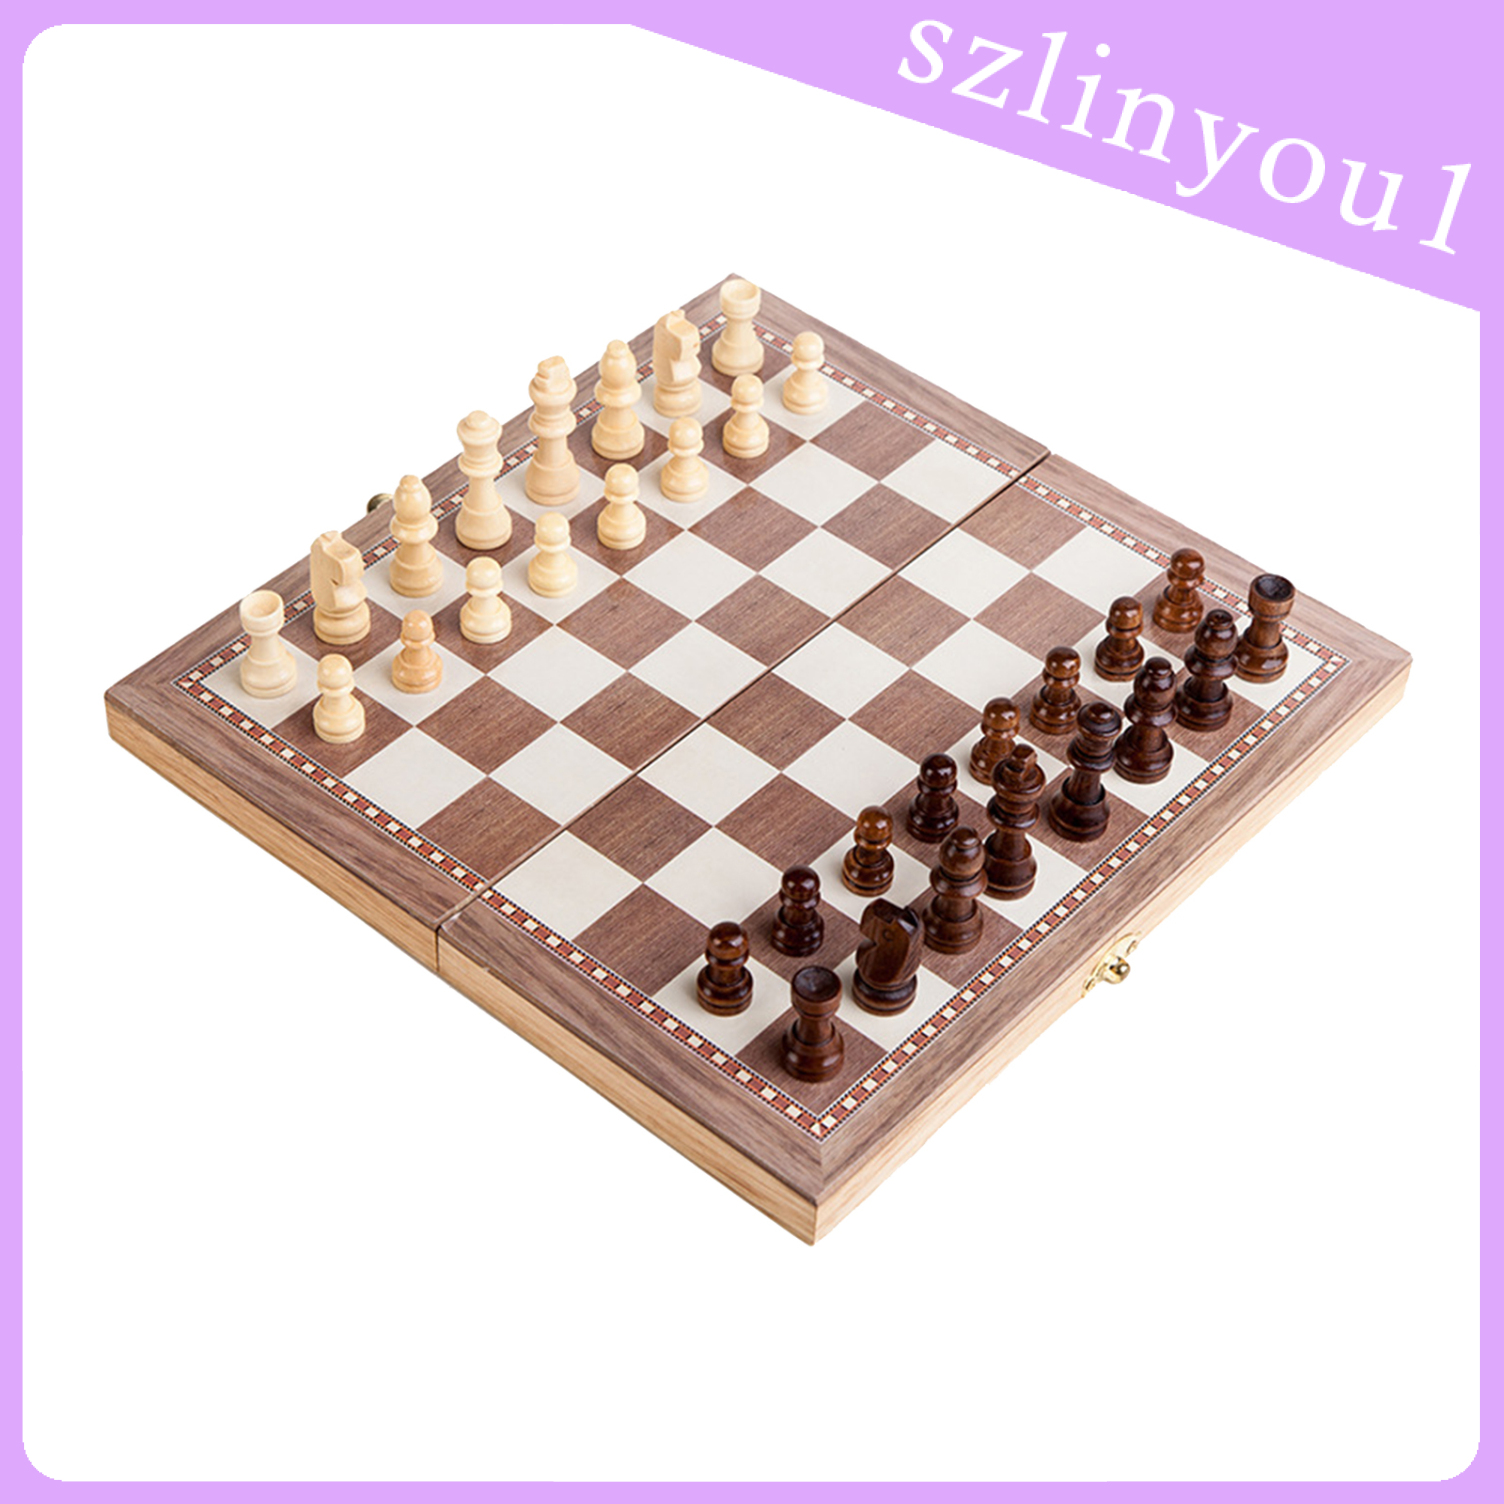 New Arrival Folding Wooden Chess Set Travel Game Toys Chess Backgammon Checkers 30x30cm